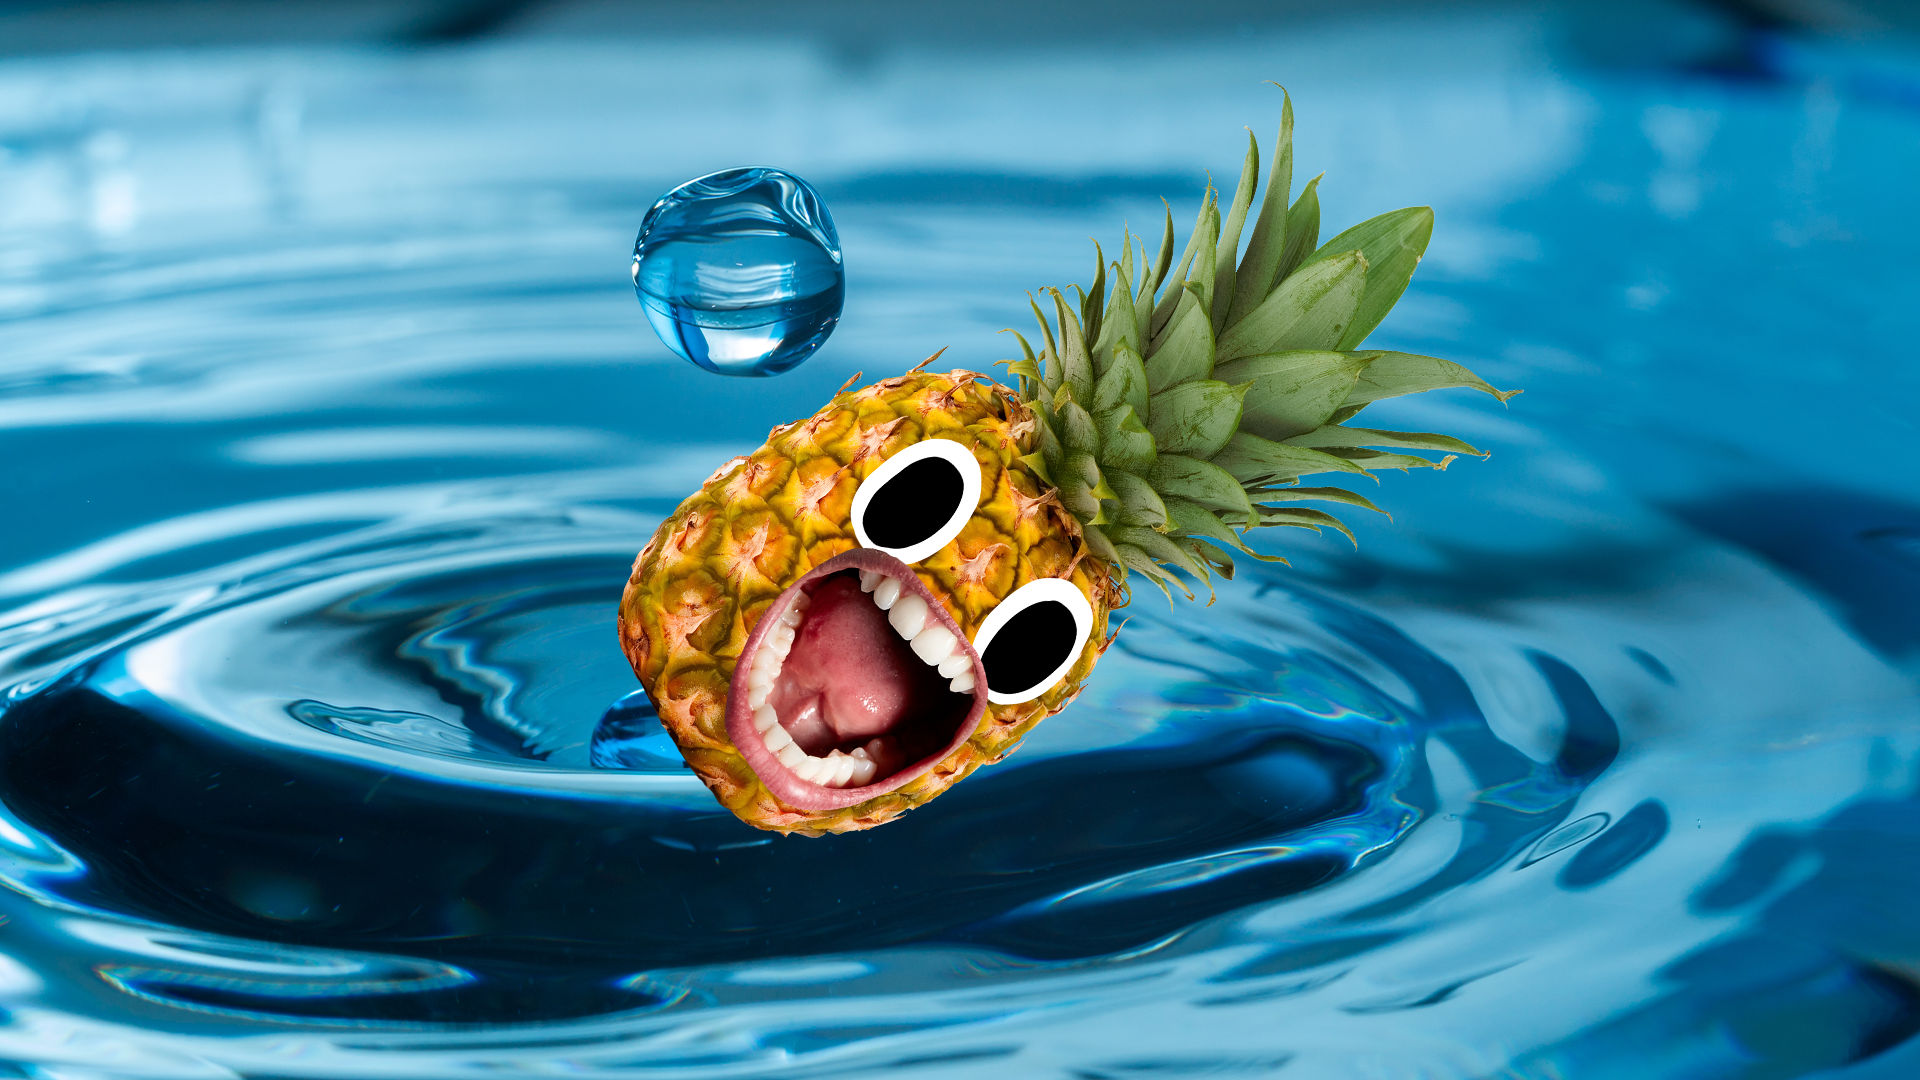 Pineapple and water background